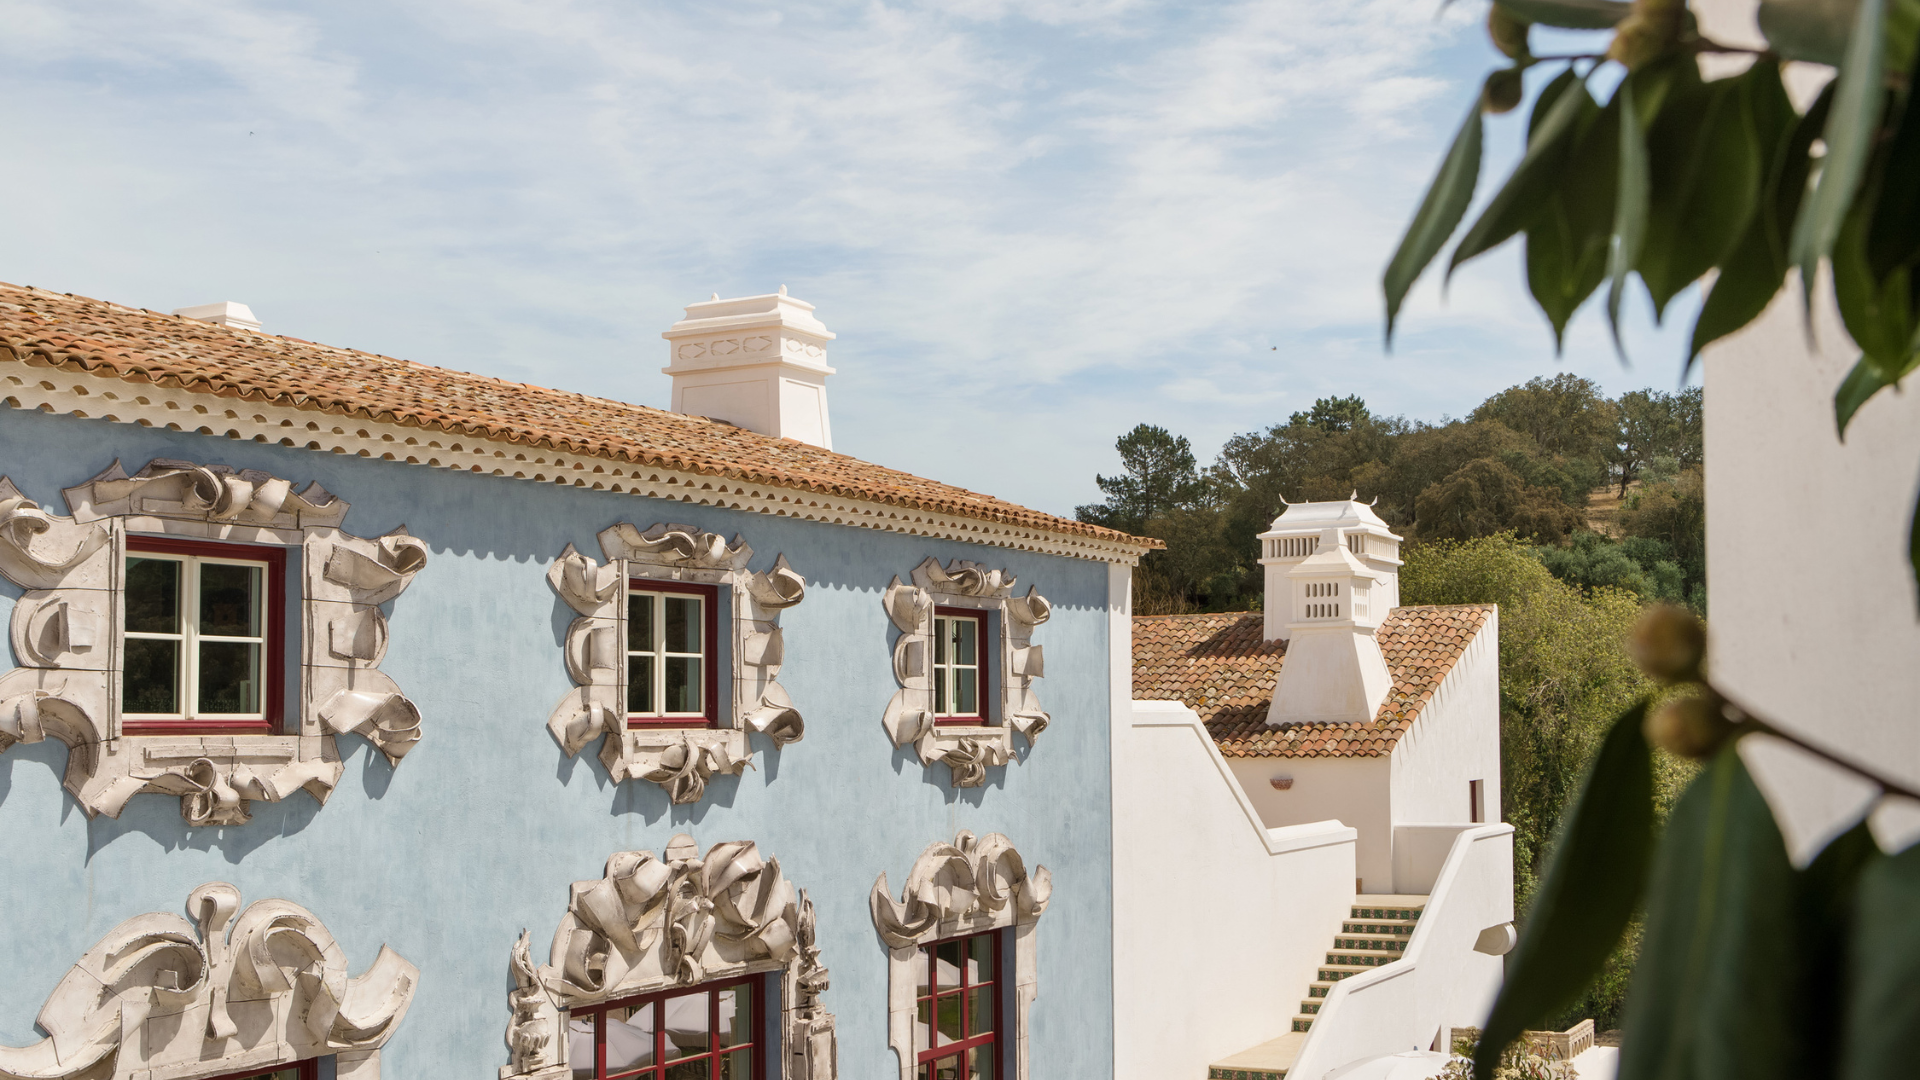 The best hotels in Portugal according to Condé Nast Traveller